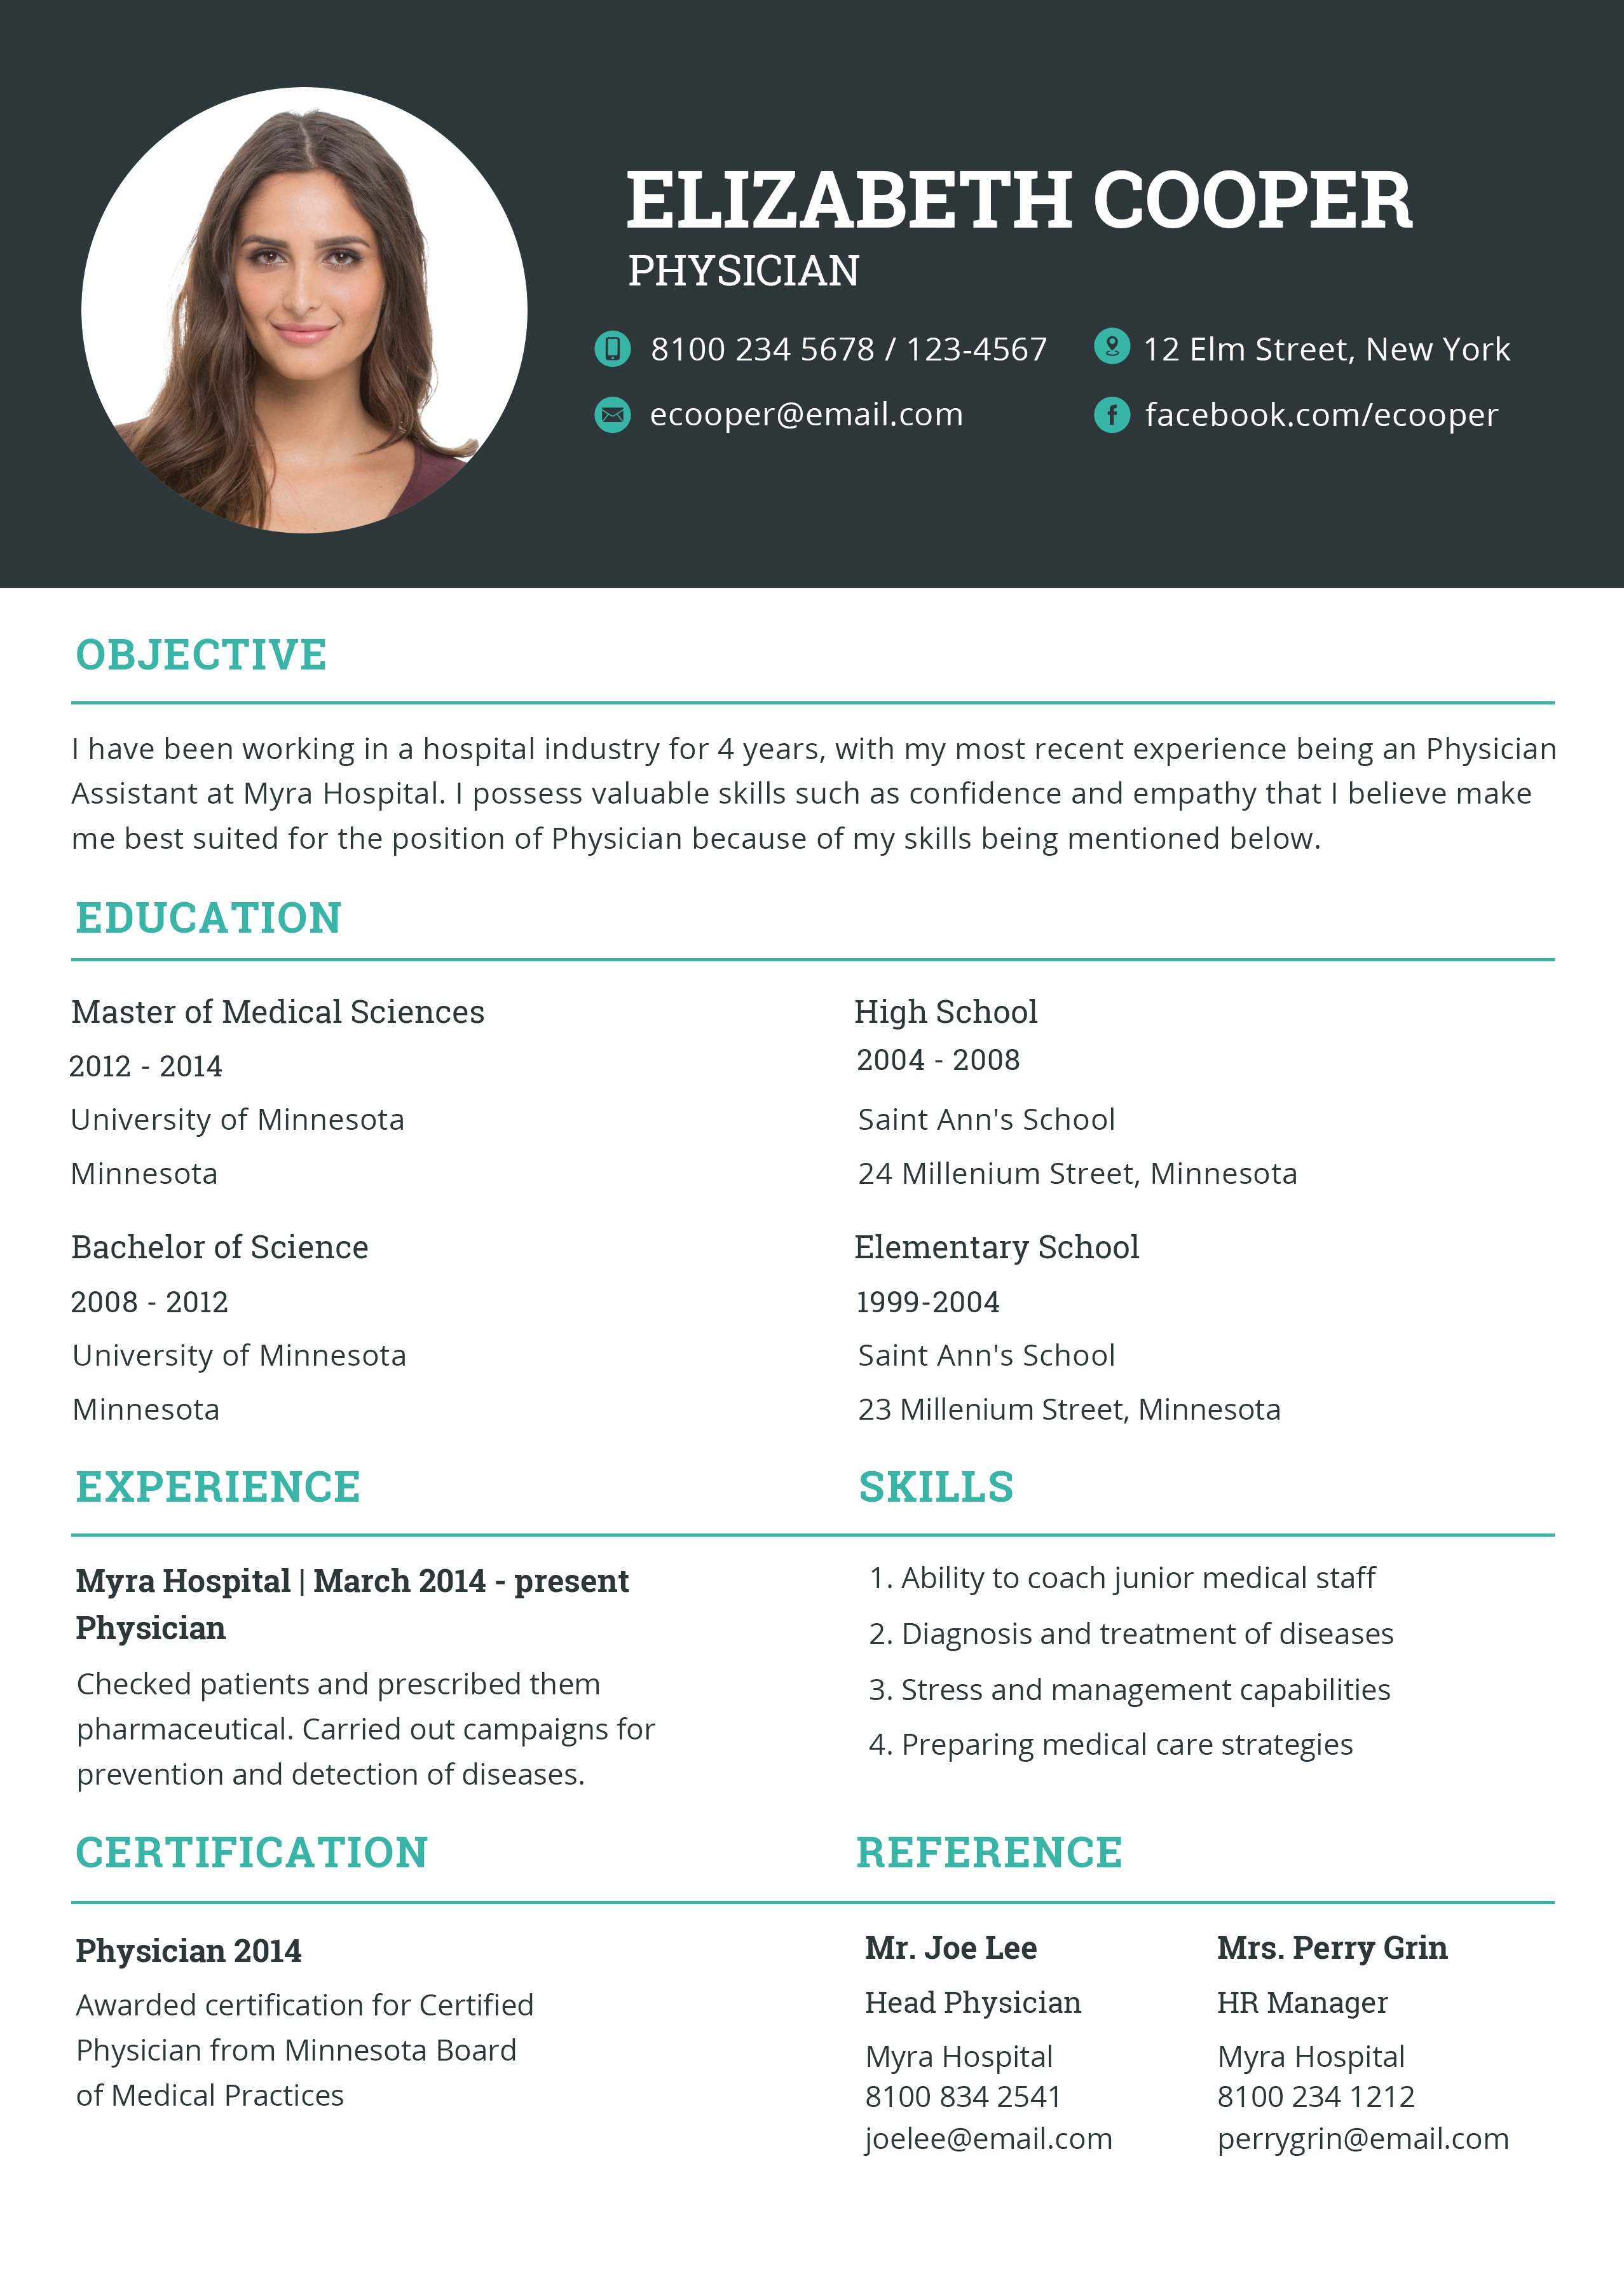 Free resume download templates microsoft word - dasexotic